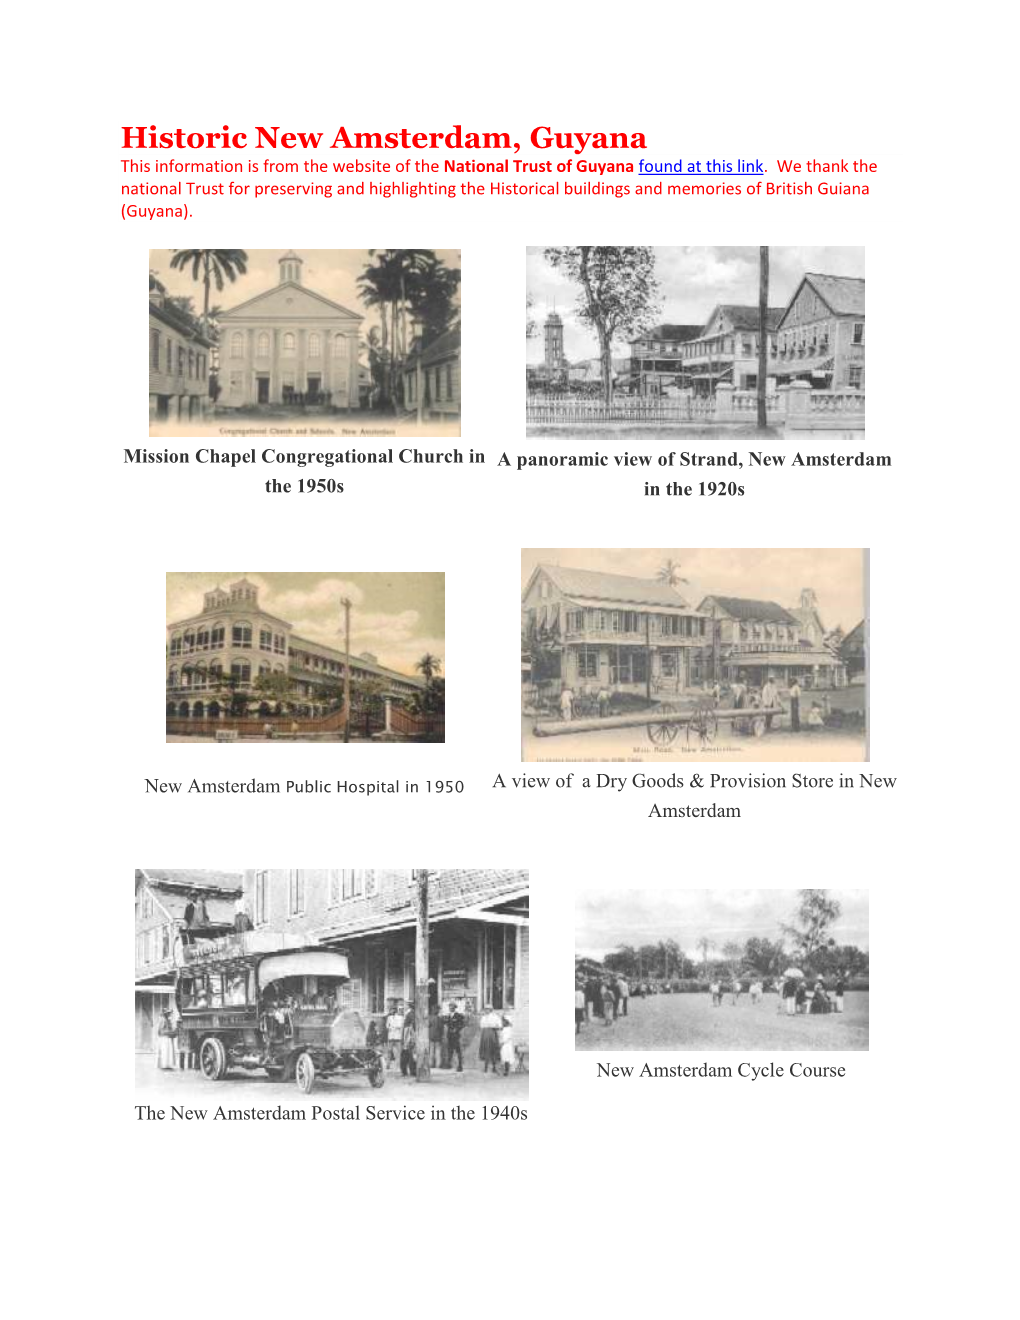 Historic New Amsterdam, Guyana This Information Is from the Website of the National Trust of Guyana Found at This Link